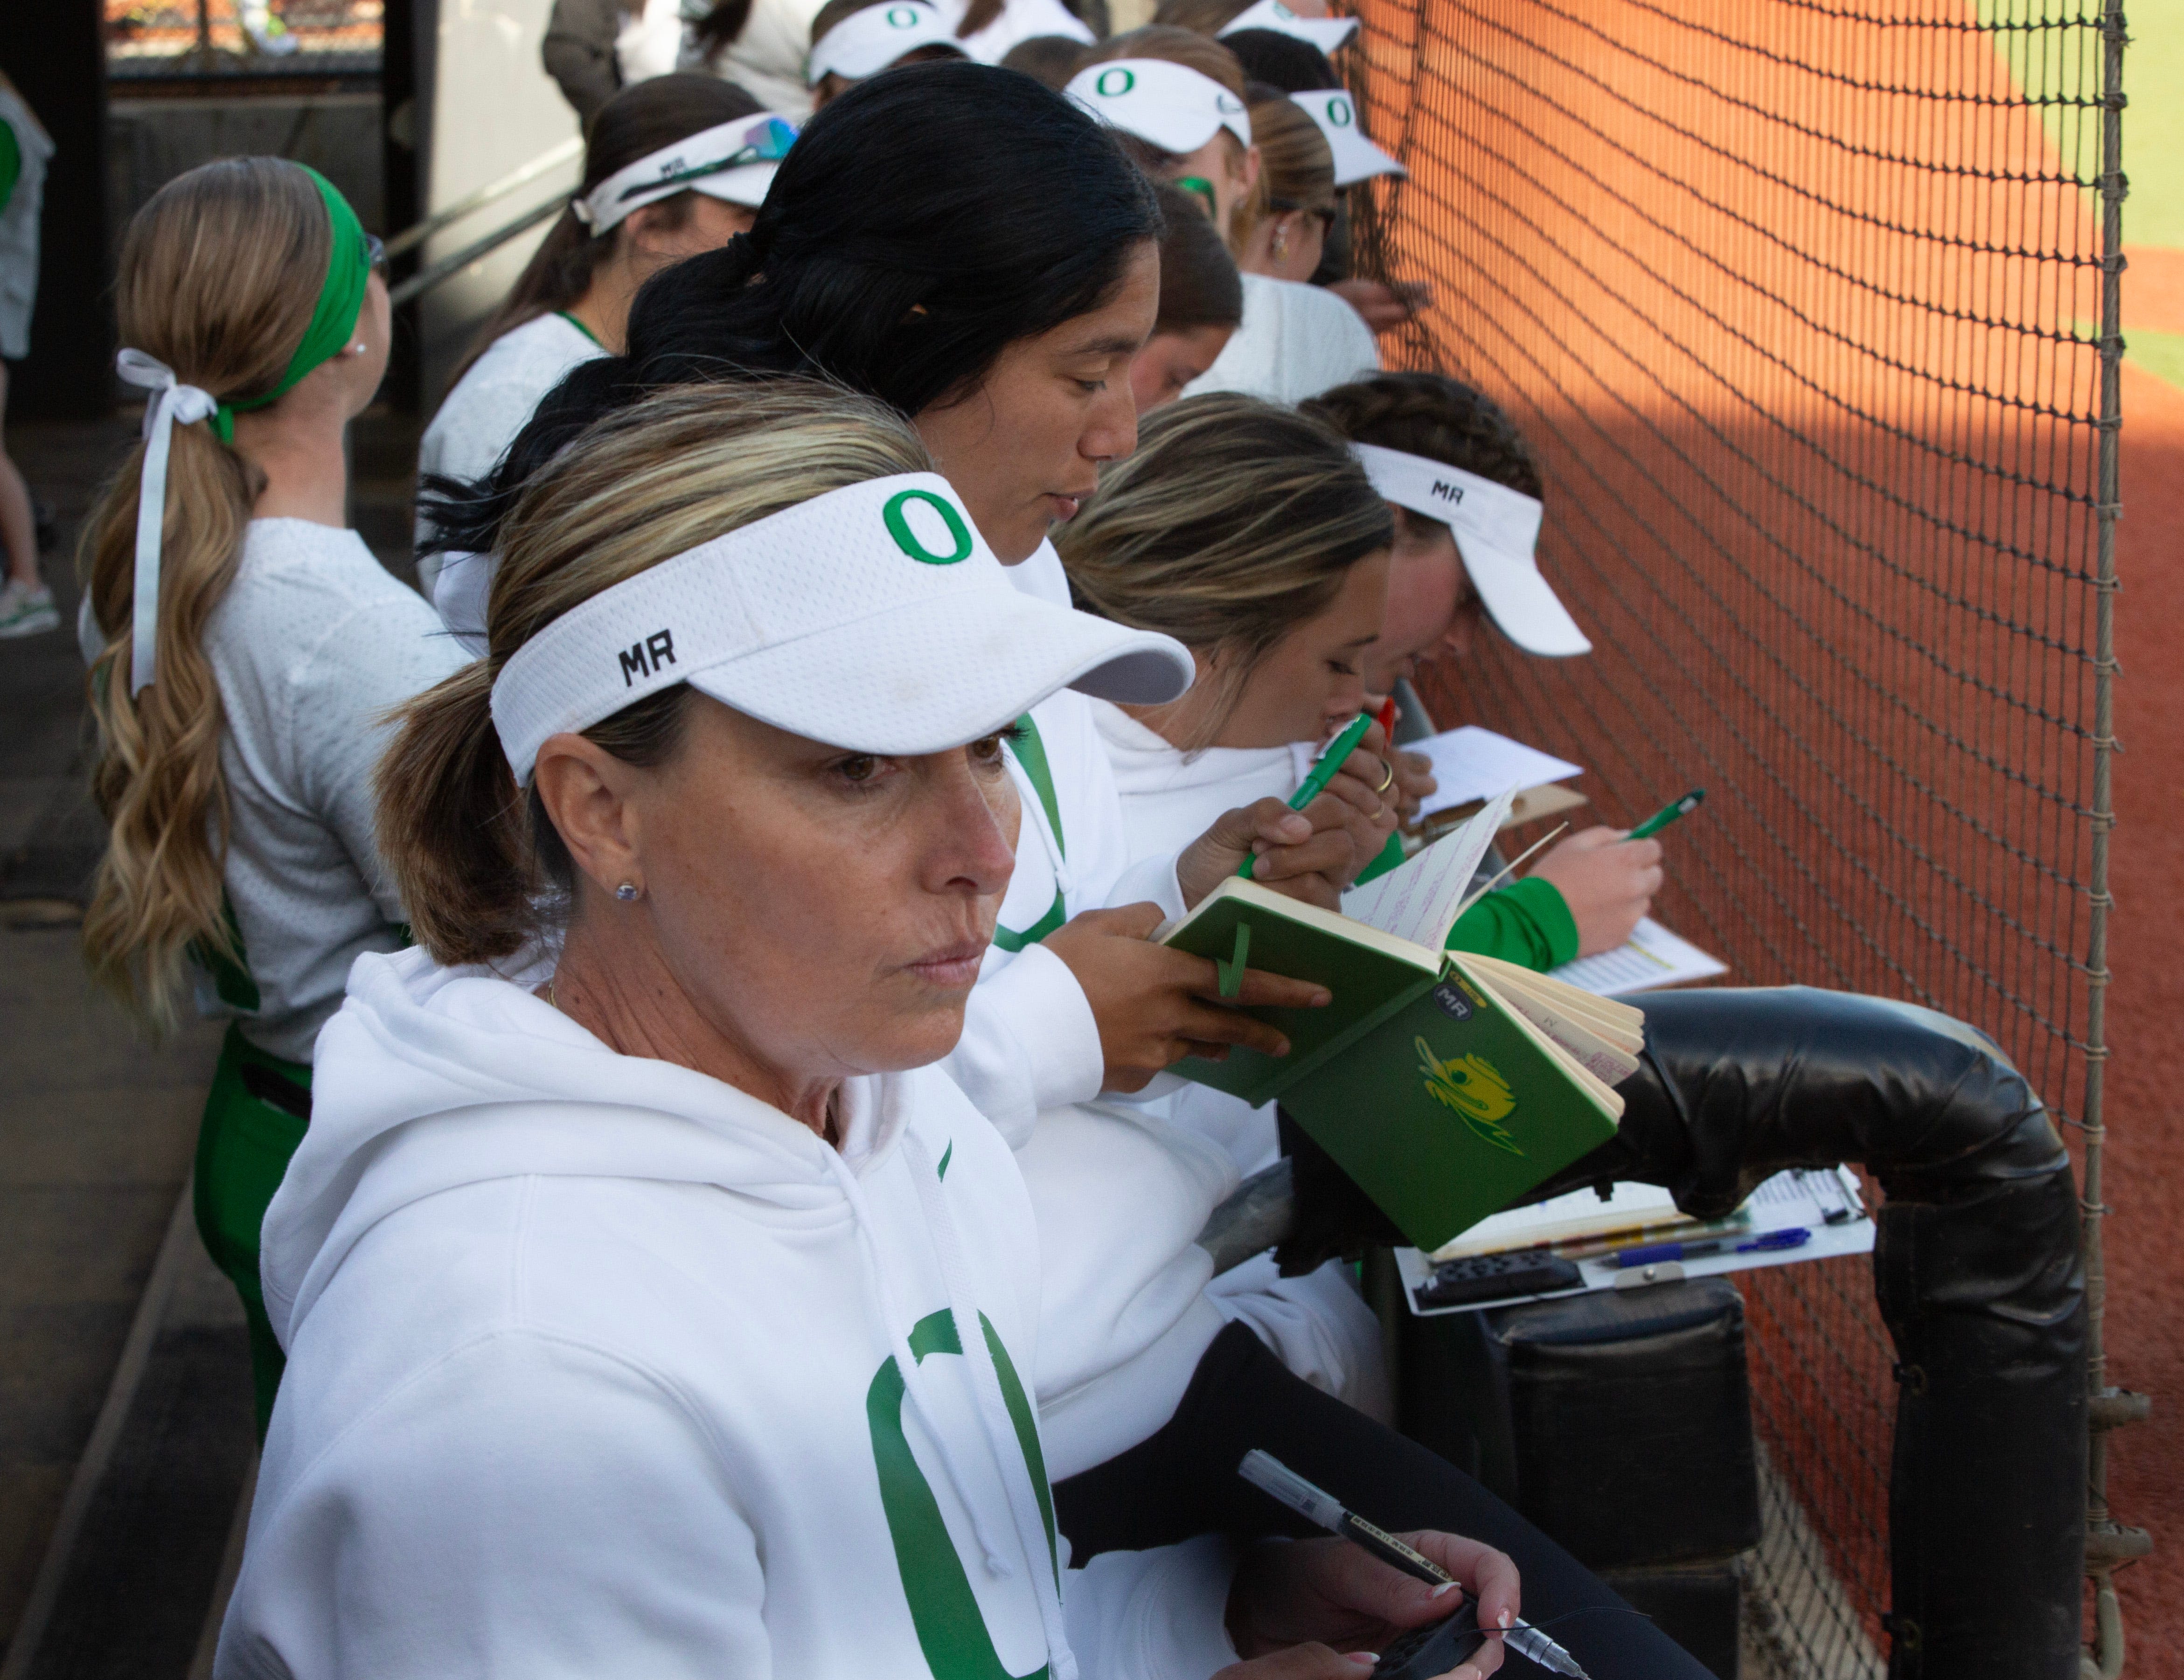 Oregon softball makes the NCAA Tournament field and will open play Friday in Oklahoma